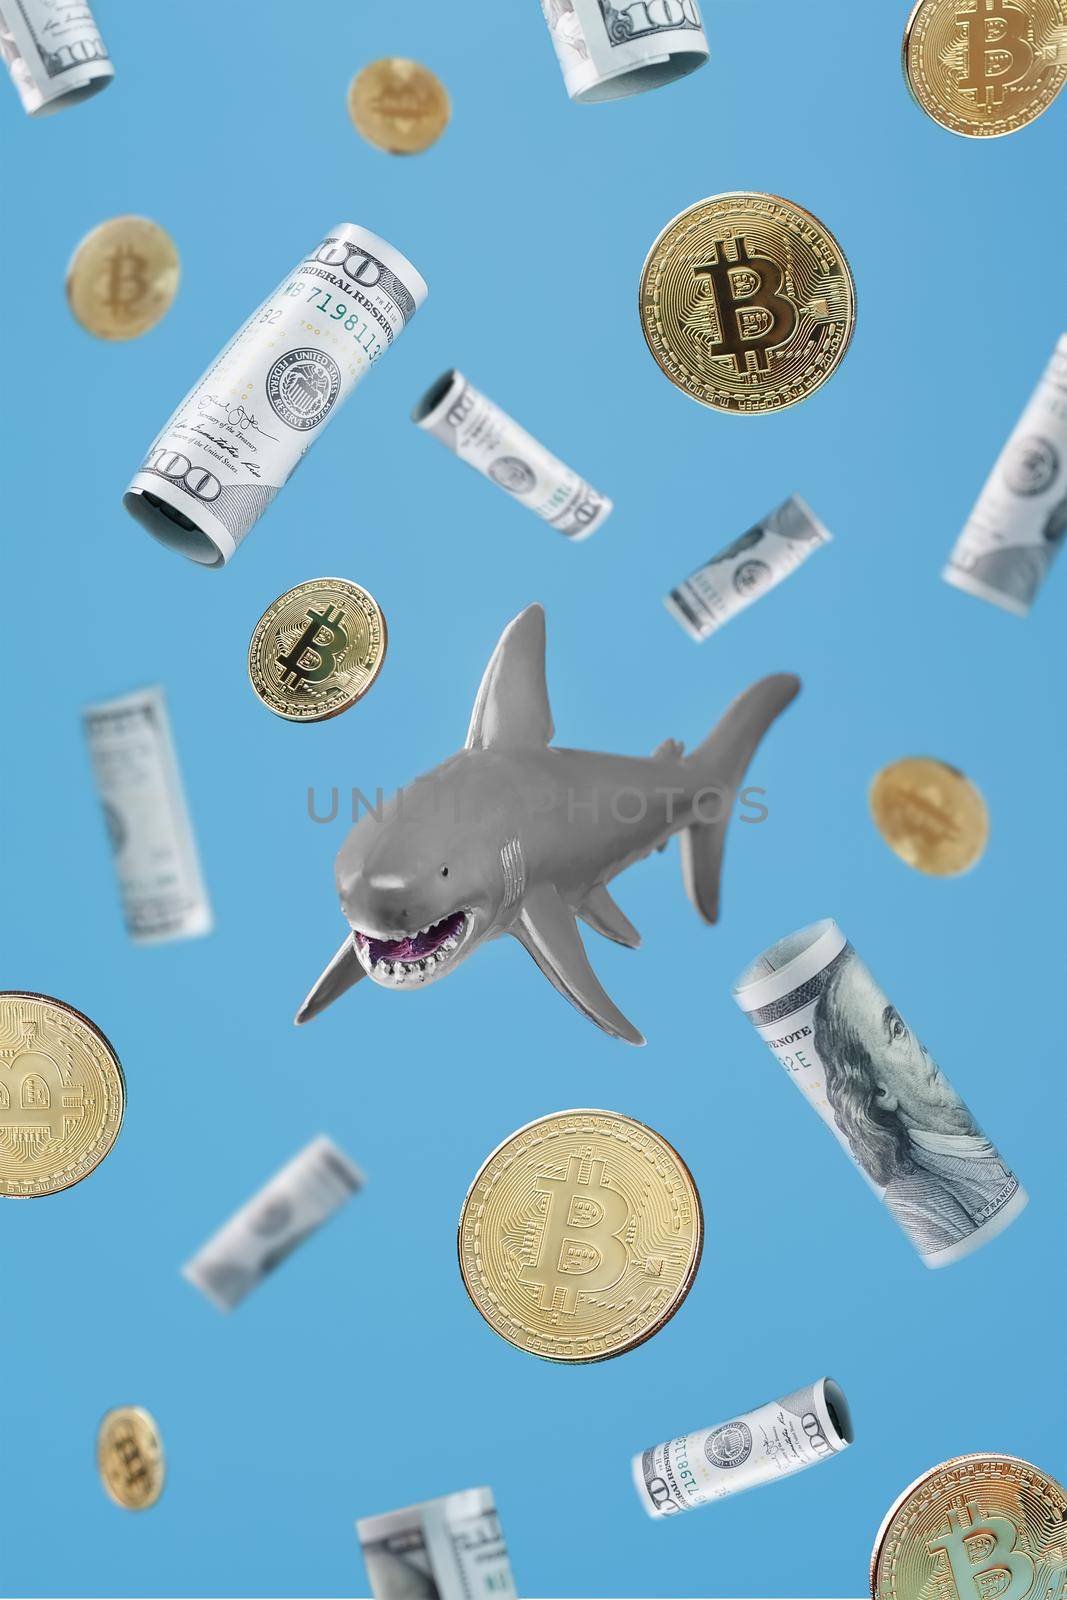 A shark swims around gold bitcoins and dollars on a blue background. Conceptual Metaphorical image of dangerous business sharks